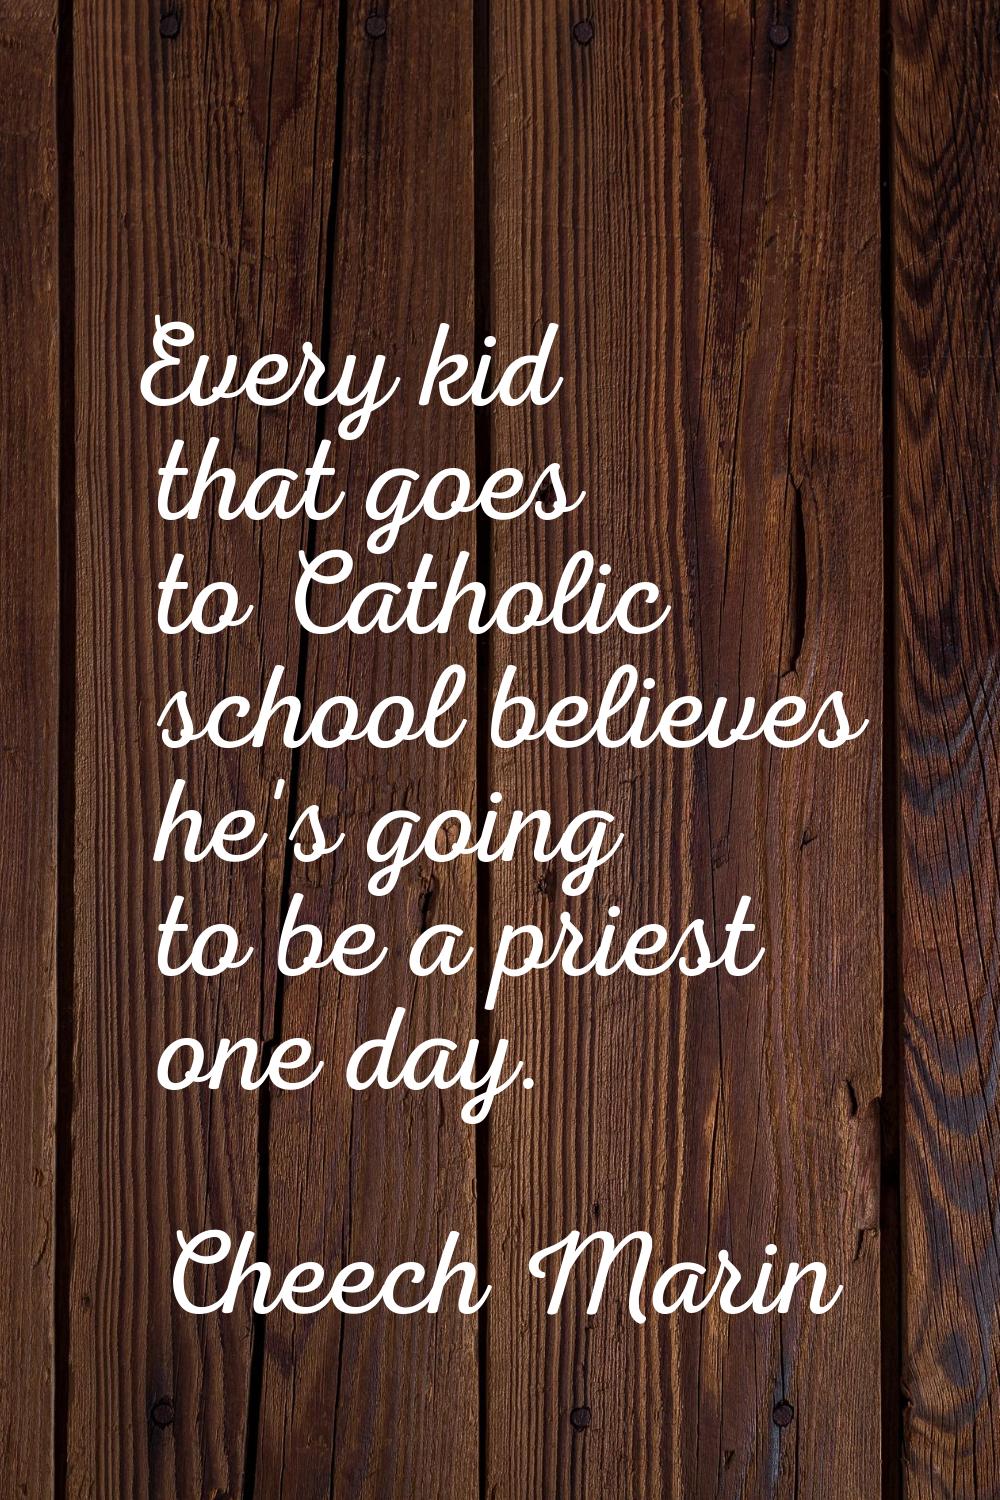 Every kid that goes to Catholic school believes he's going to be a priest one day.